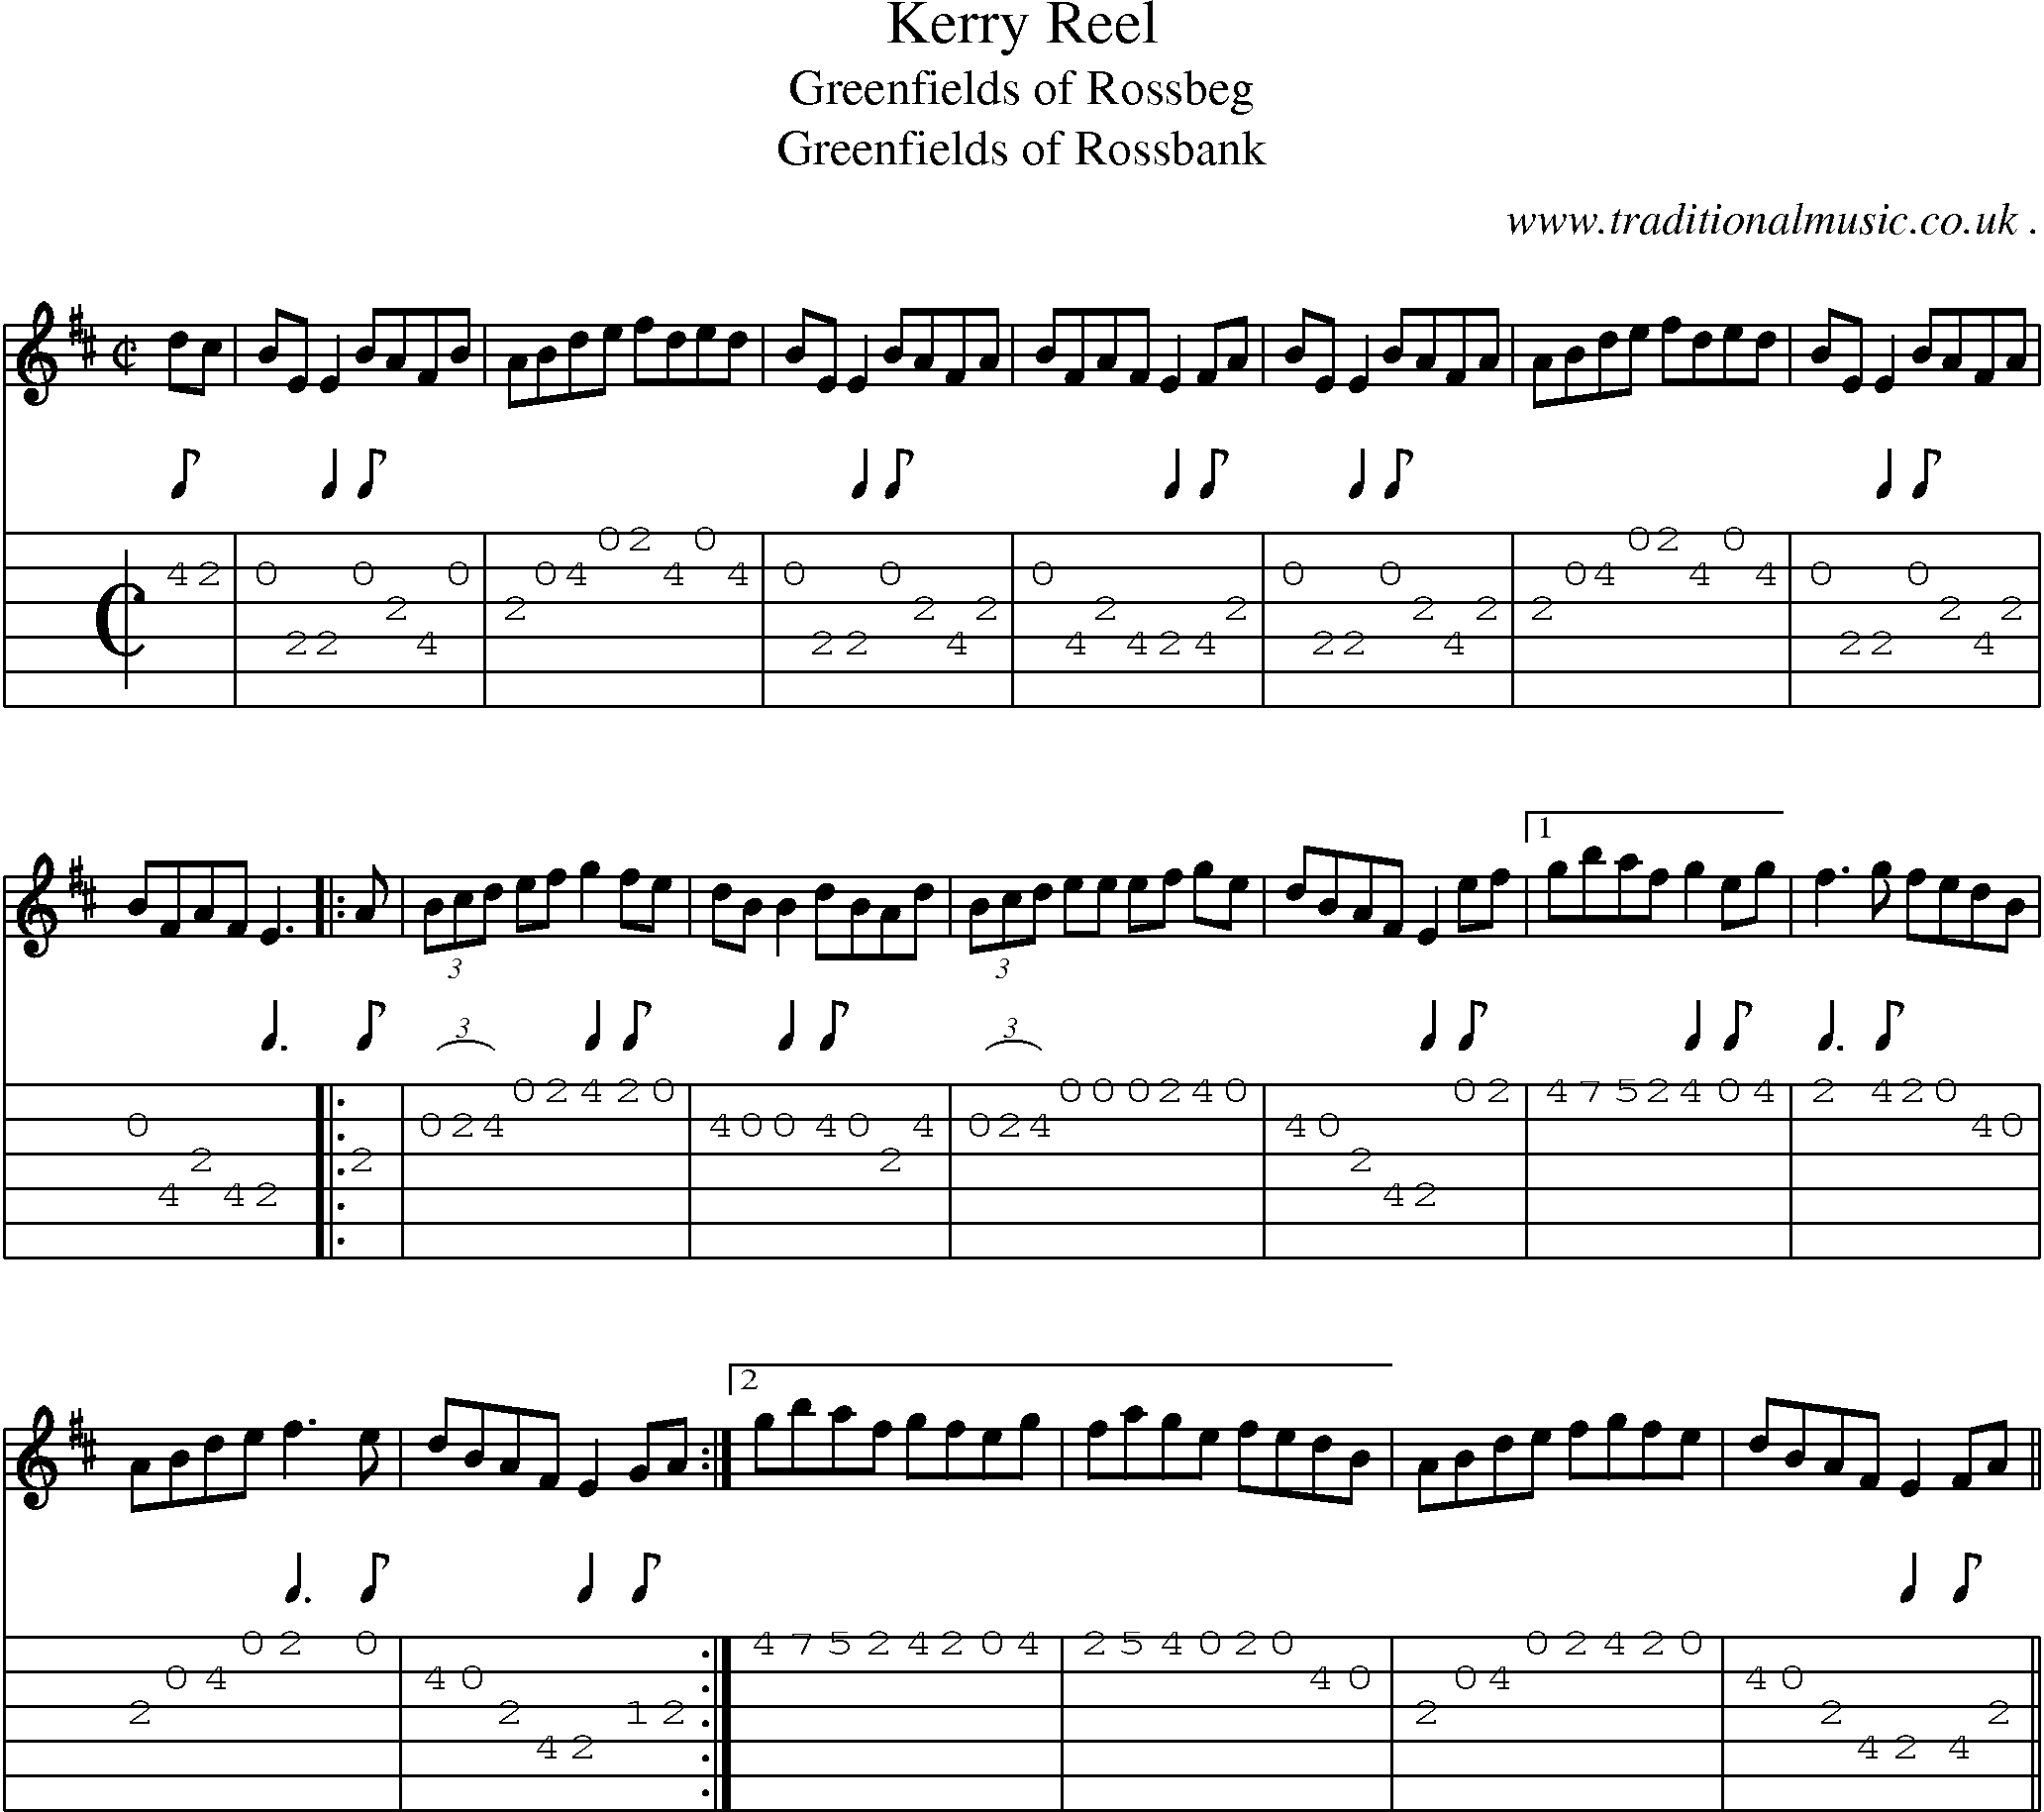 Sheet-Music and Guitar Tabs for Kerry Reel